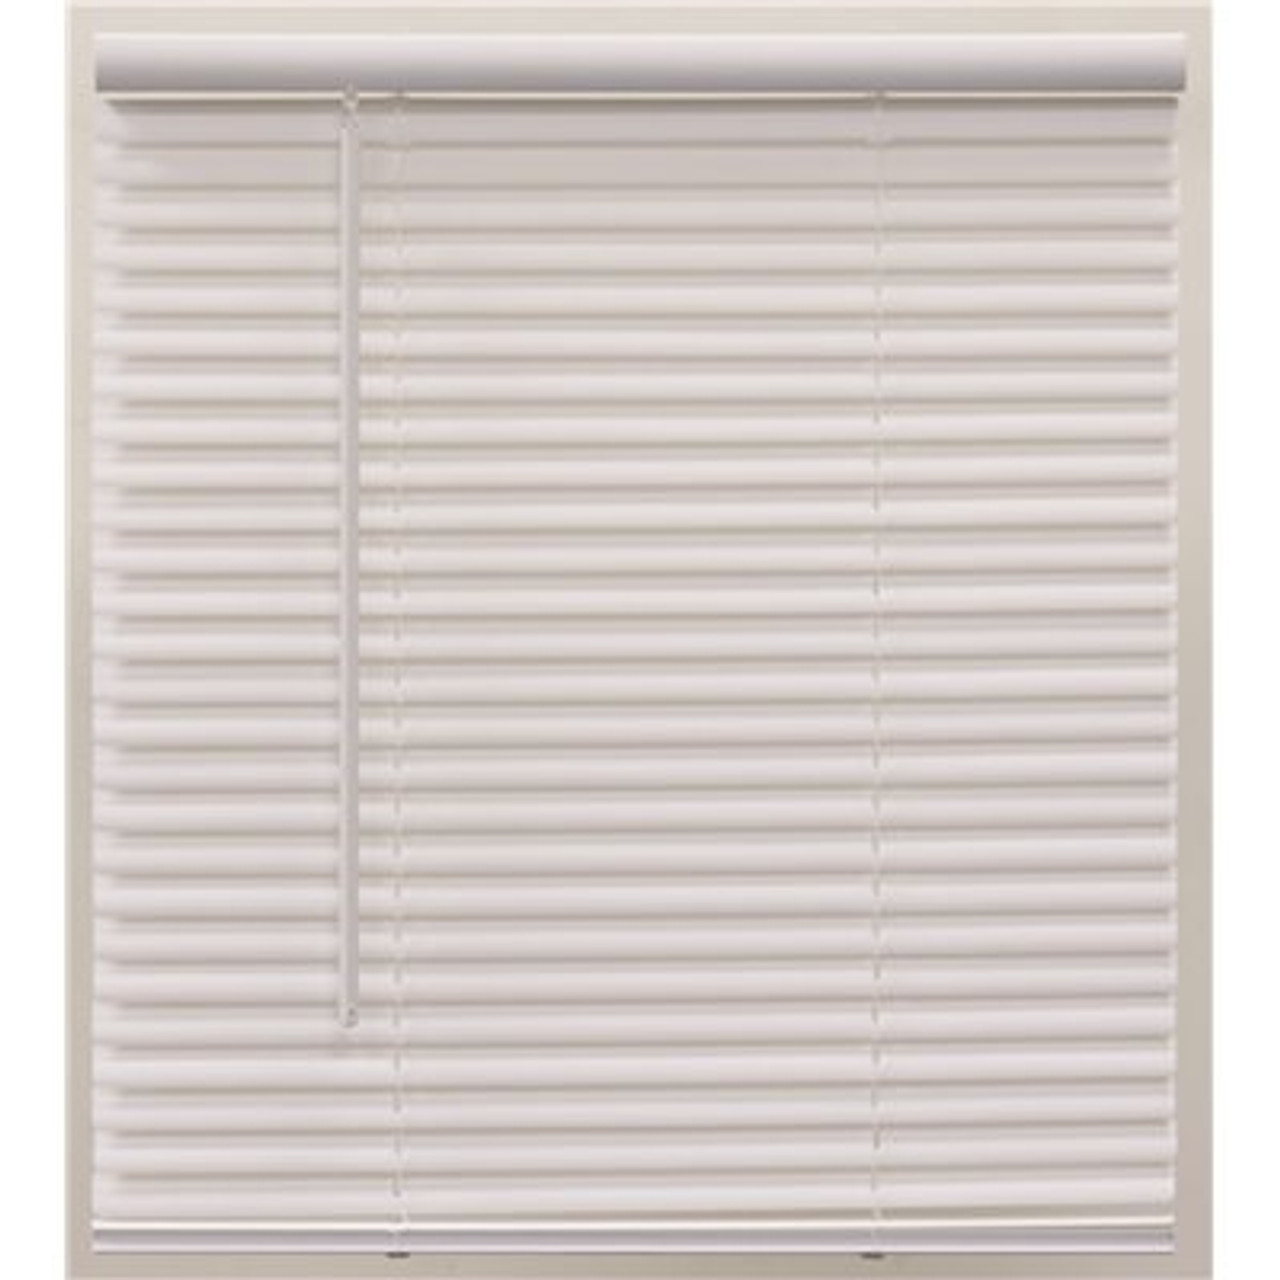 Champion Pre-Cut 24 in. W x 64 in. L White Cordless Light Filtering Vinyl Mini Blind with 1 in. Slats